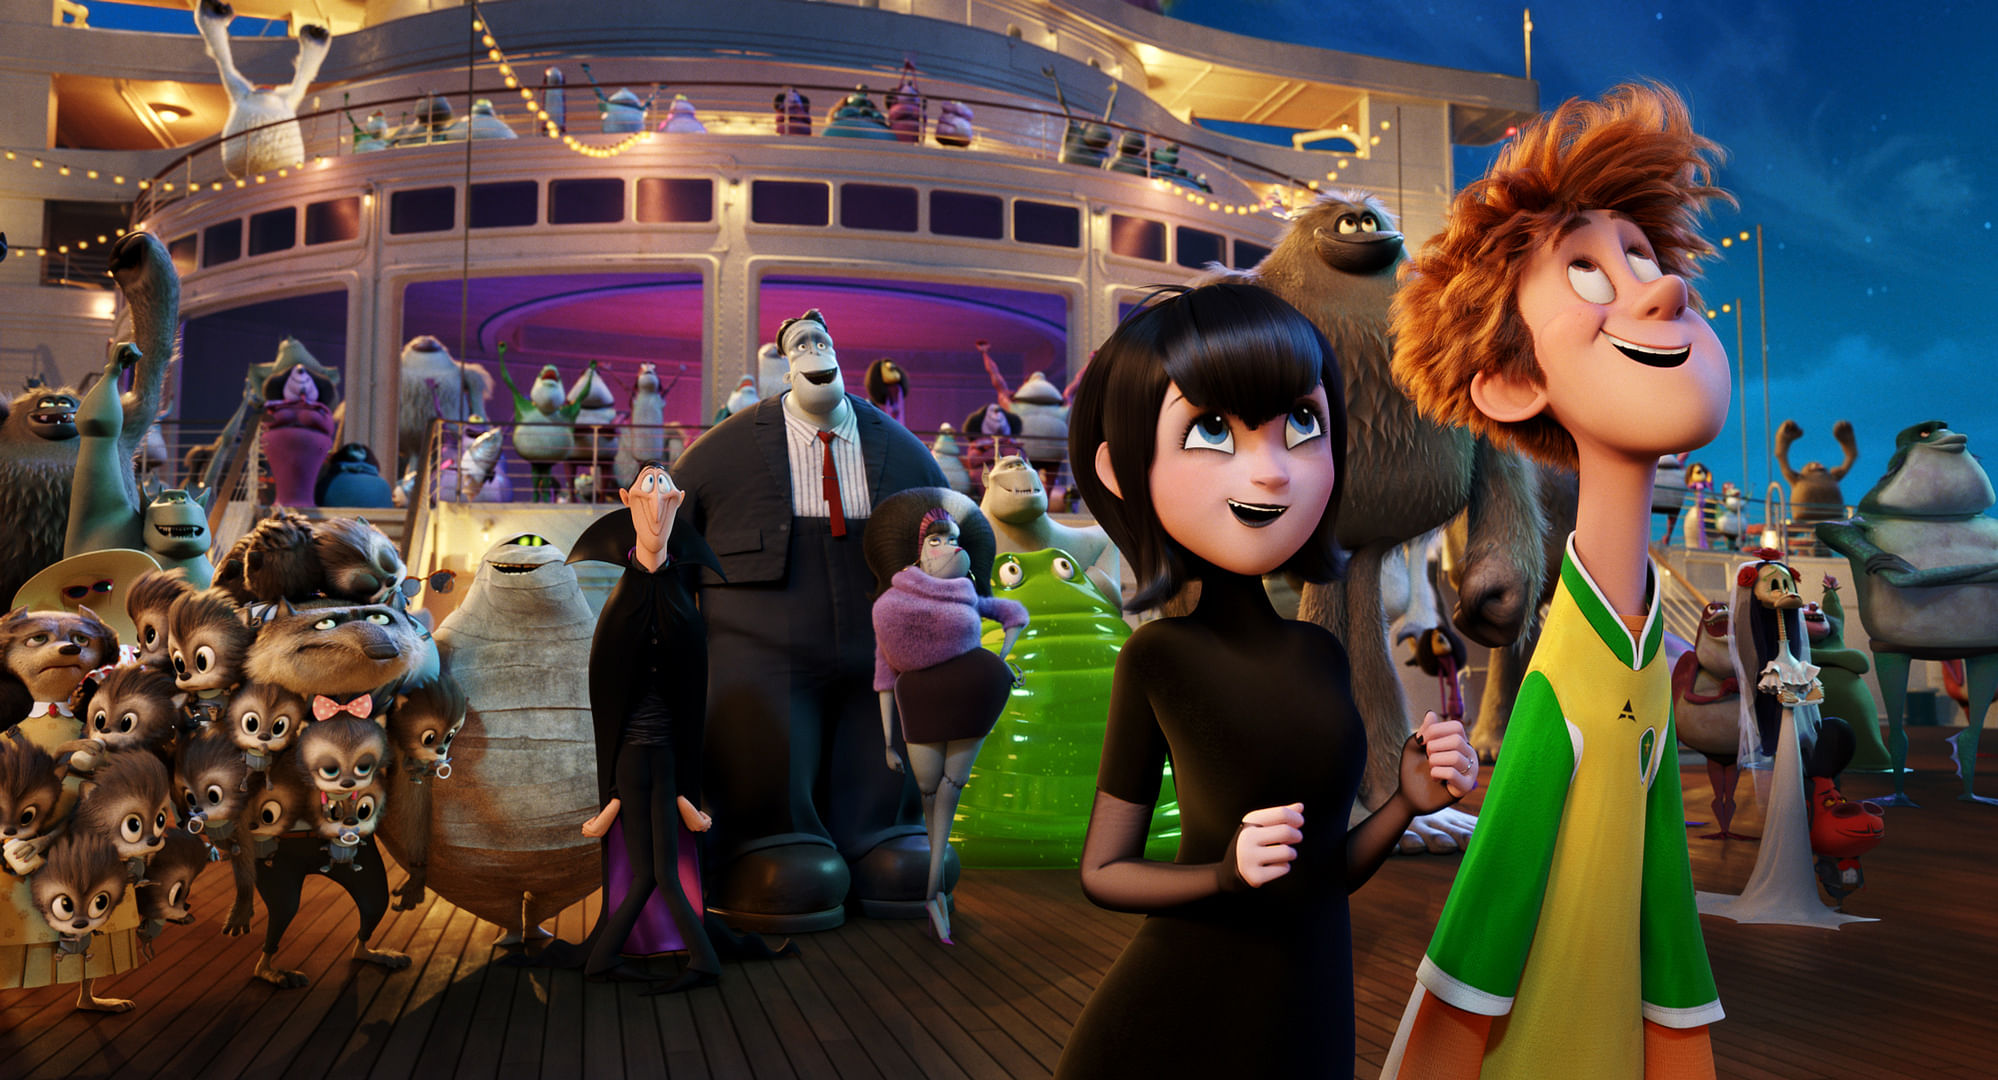 ‘Hotel Transylvania 3: A Monster Vacation’ hits the screens today.